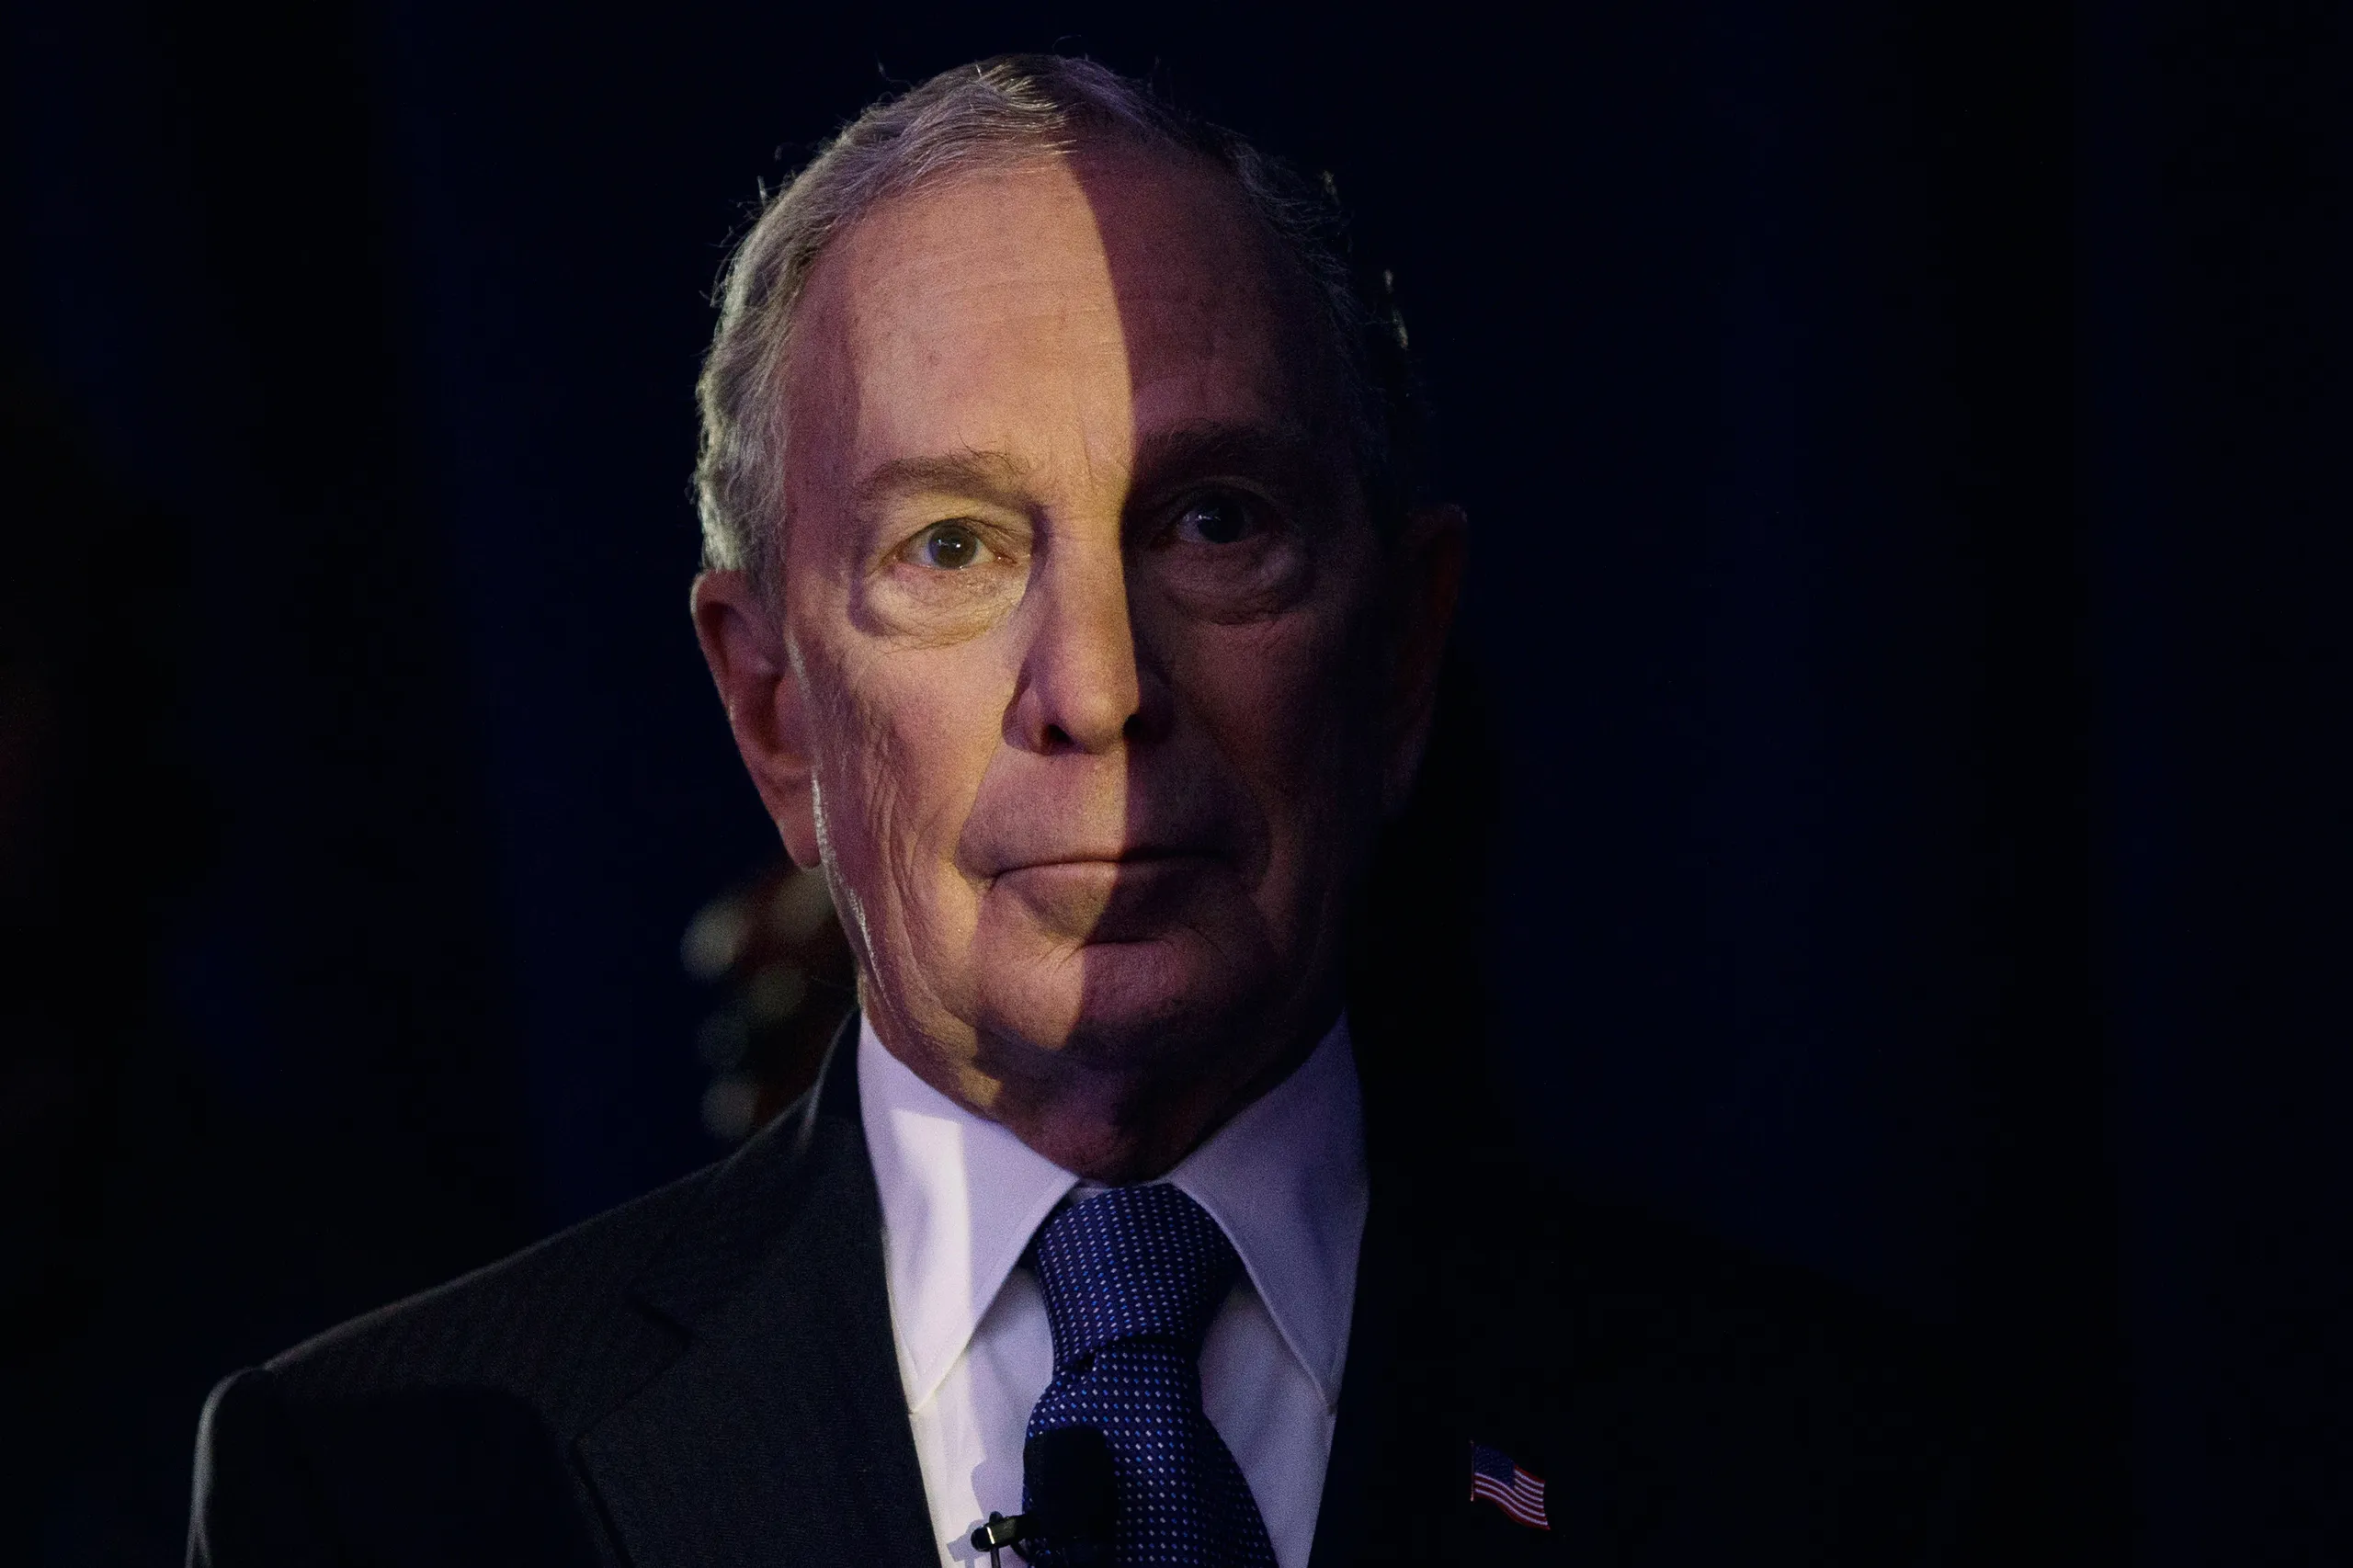 What Michael Bloomberg thinks about joint ventures